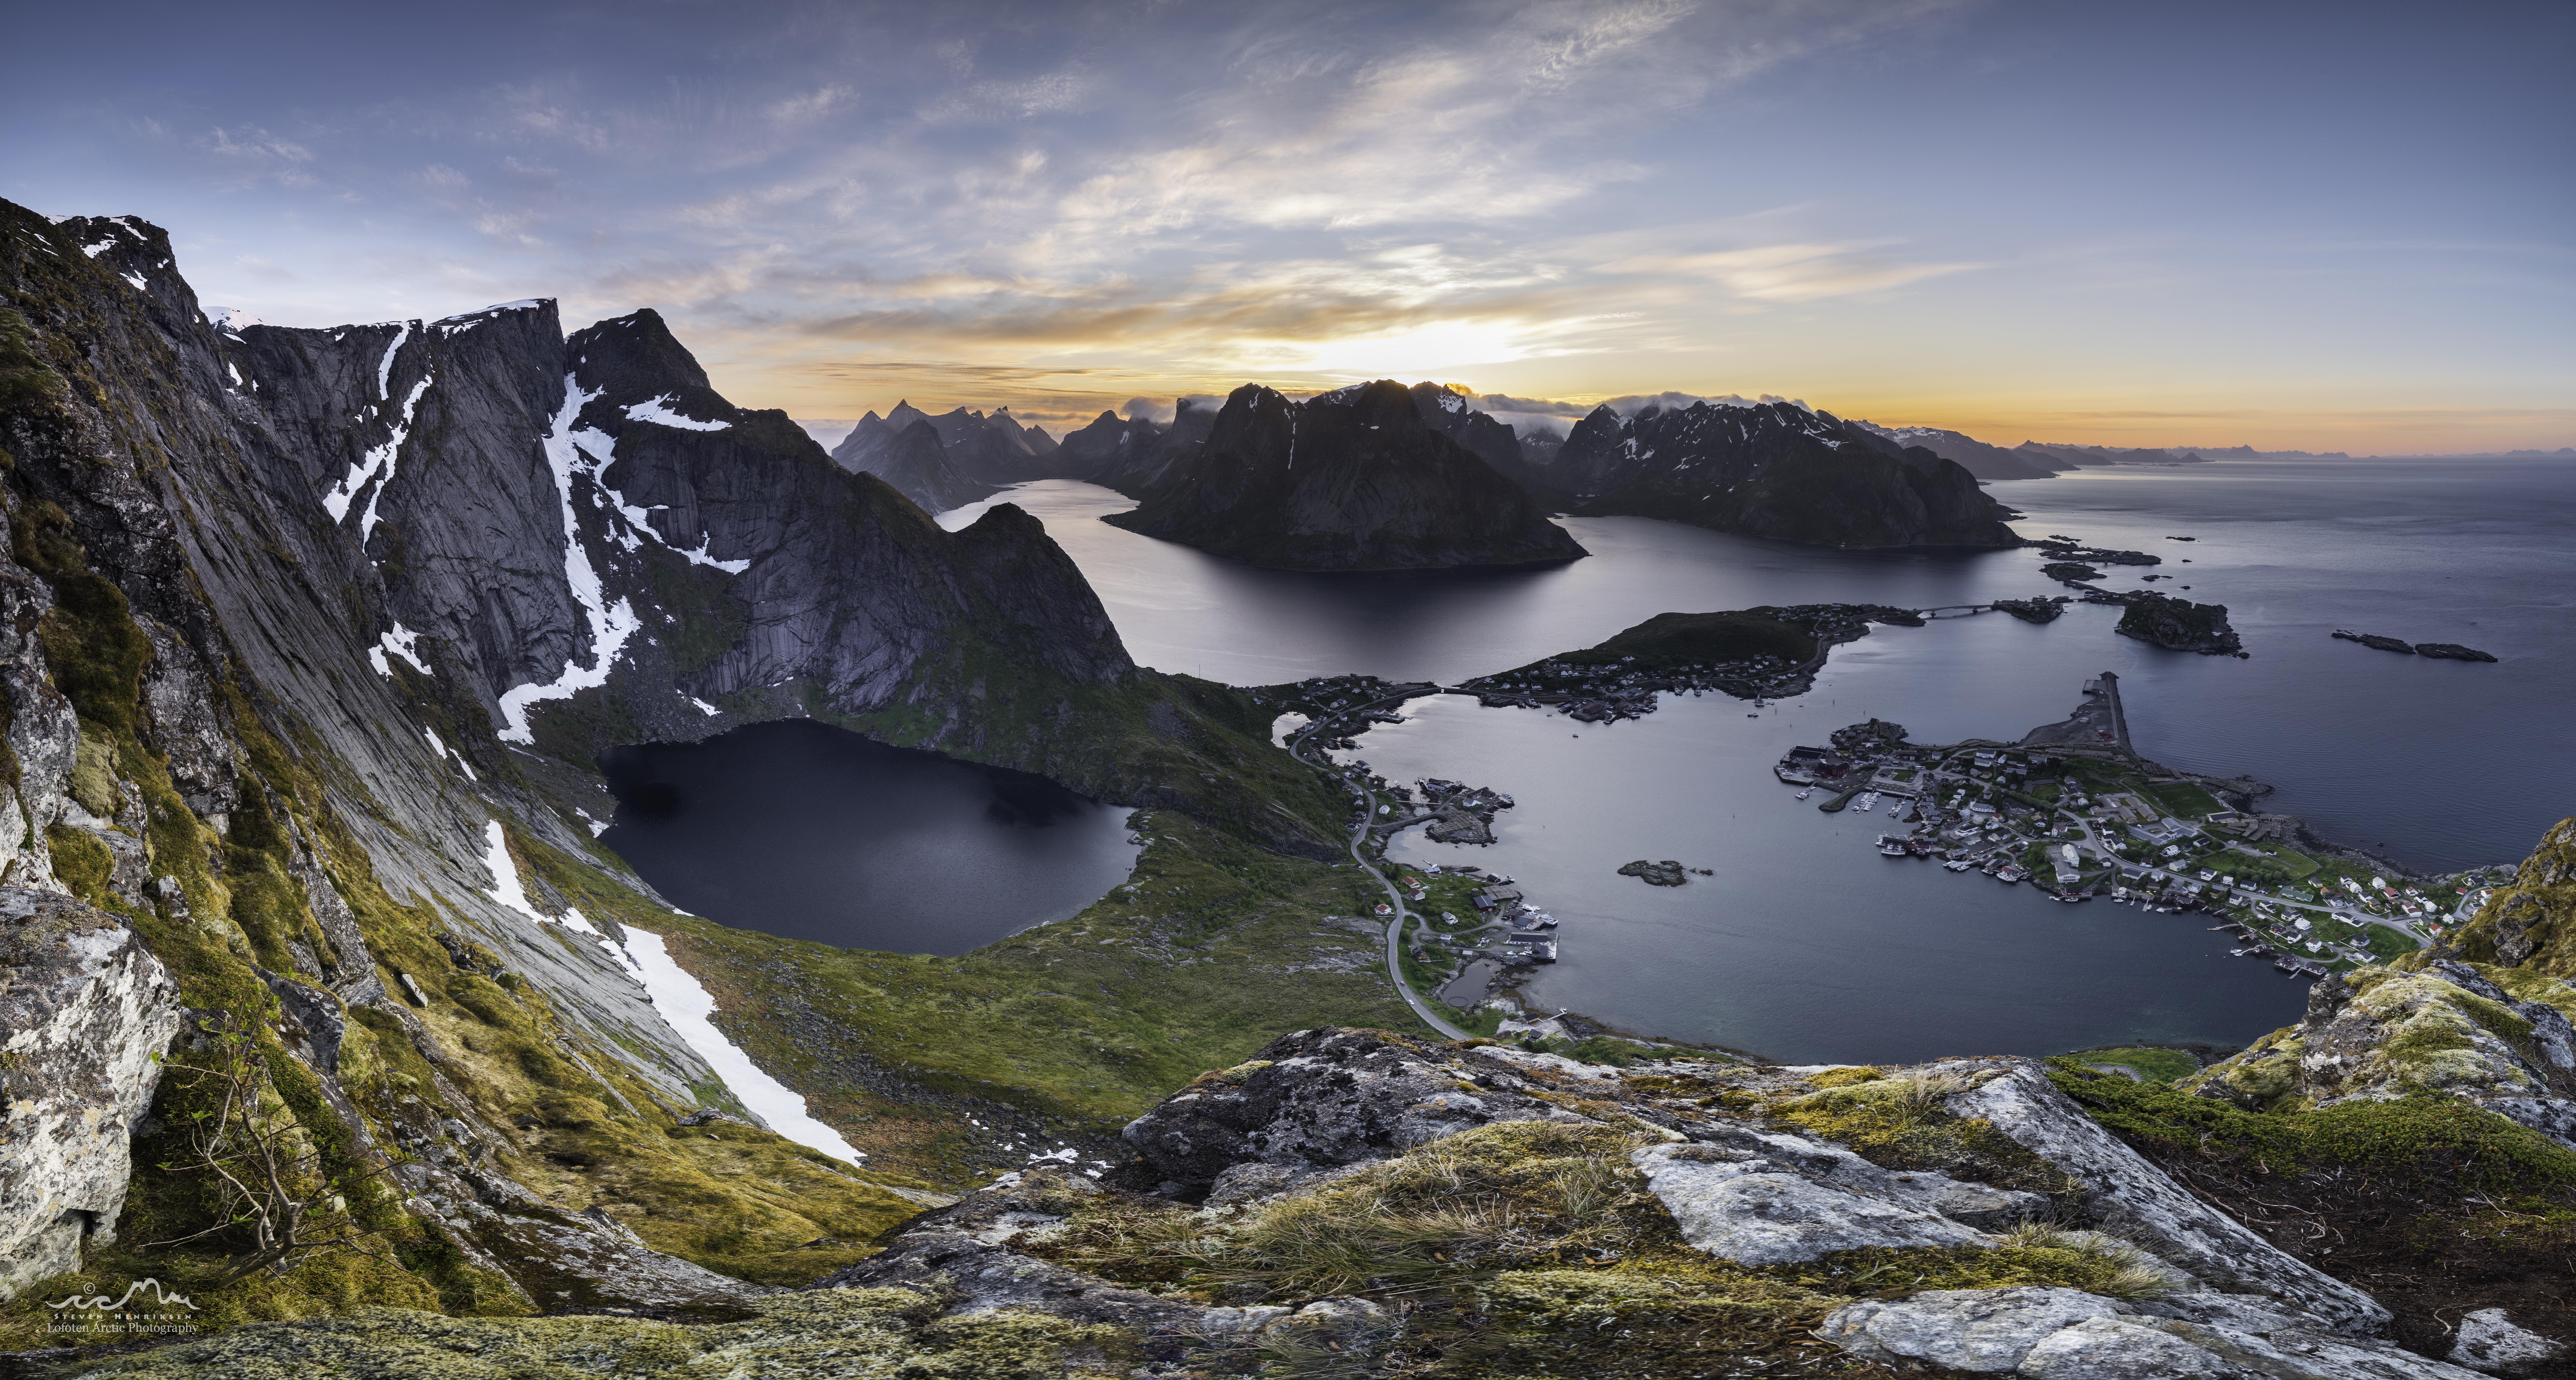 How to get the most out of your travel in Northern Norway